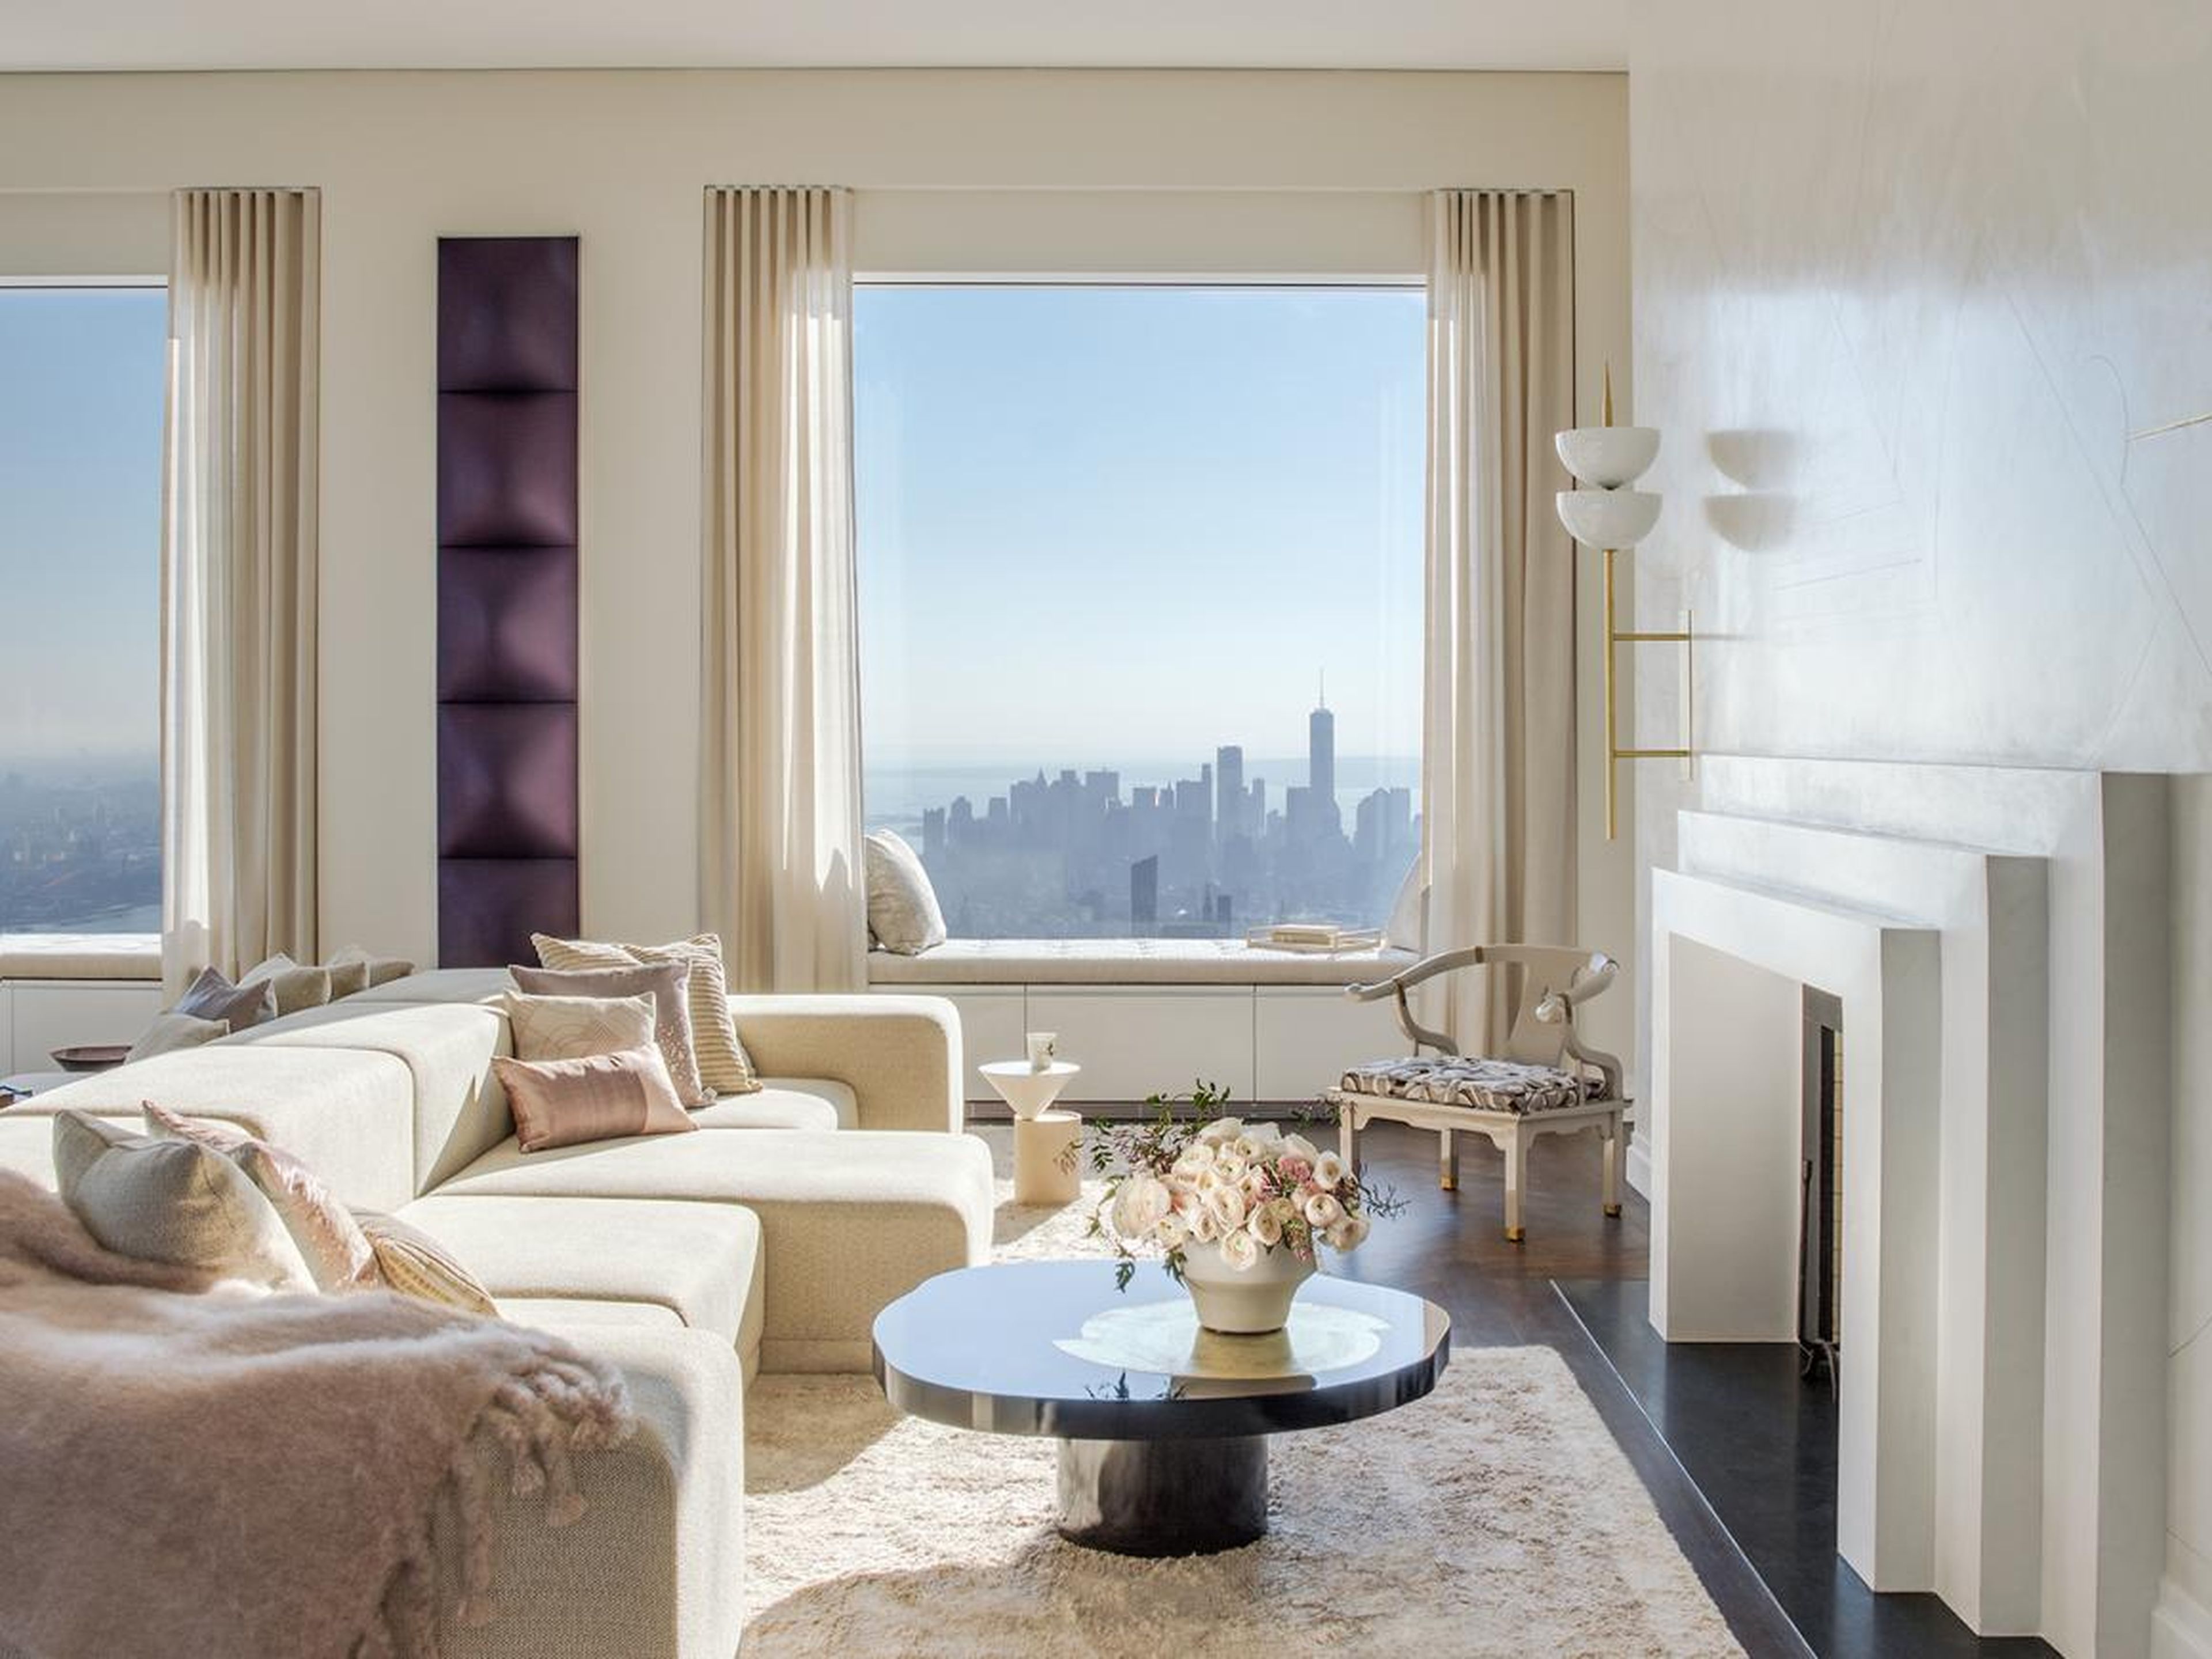 The floor, accessed by a private elevator, offers panoramic views of the city and Central Park.